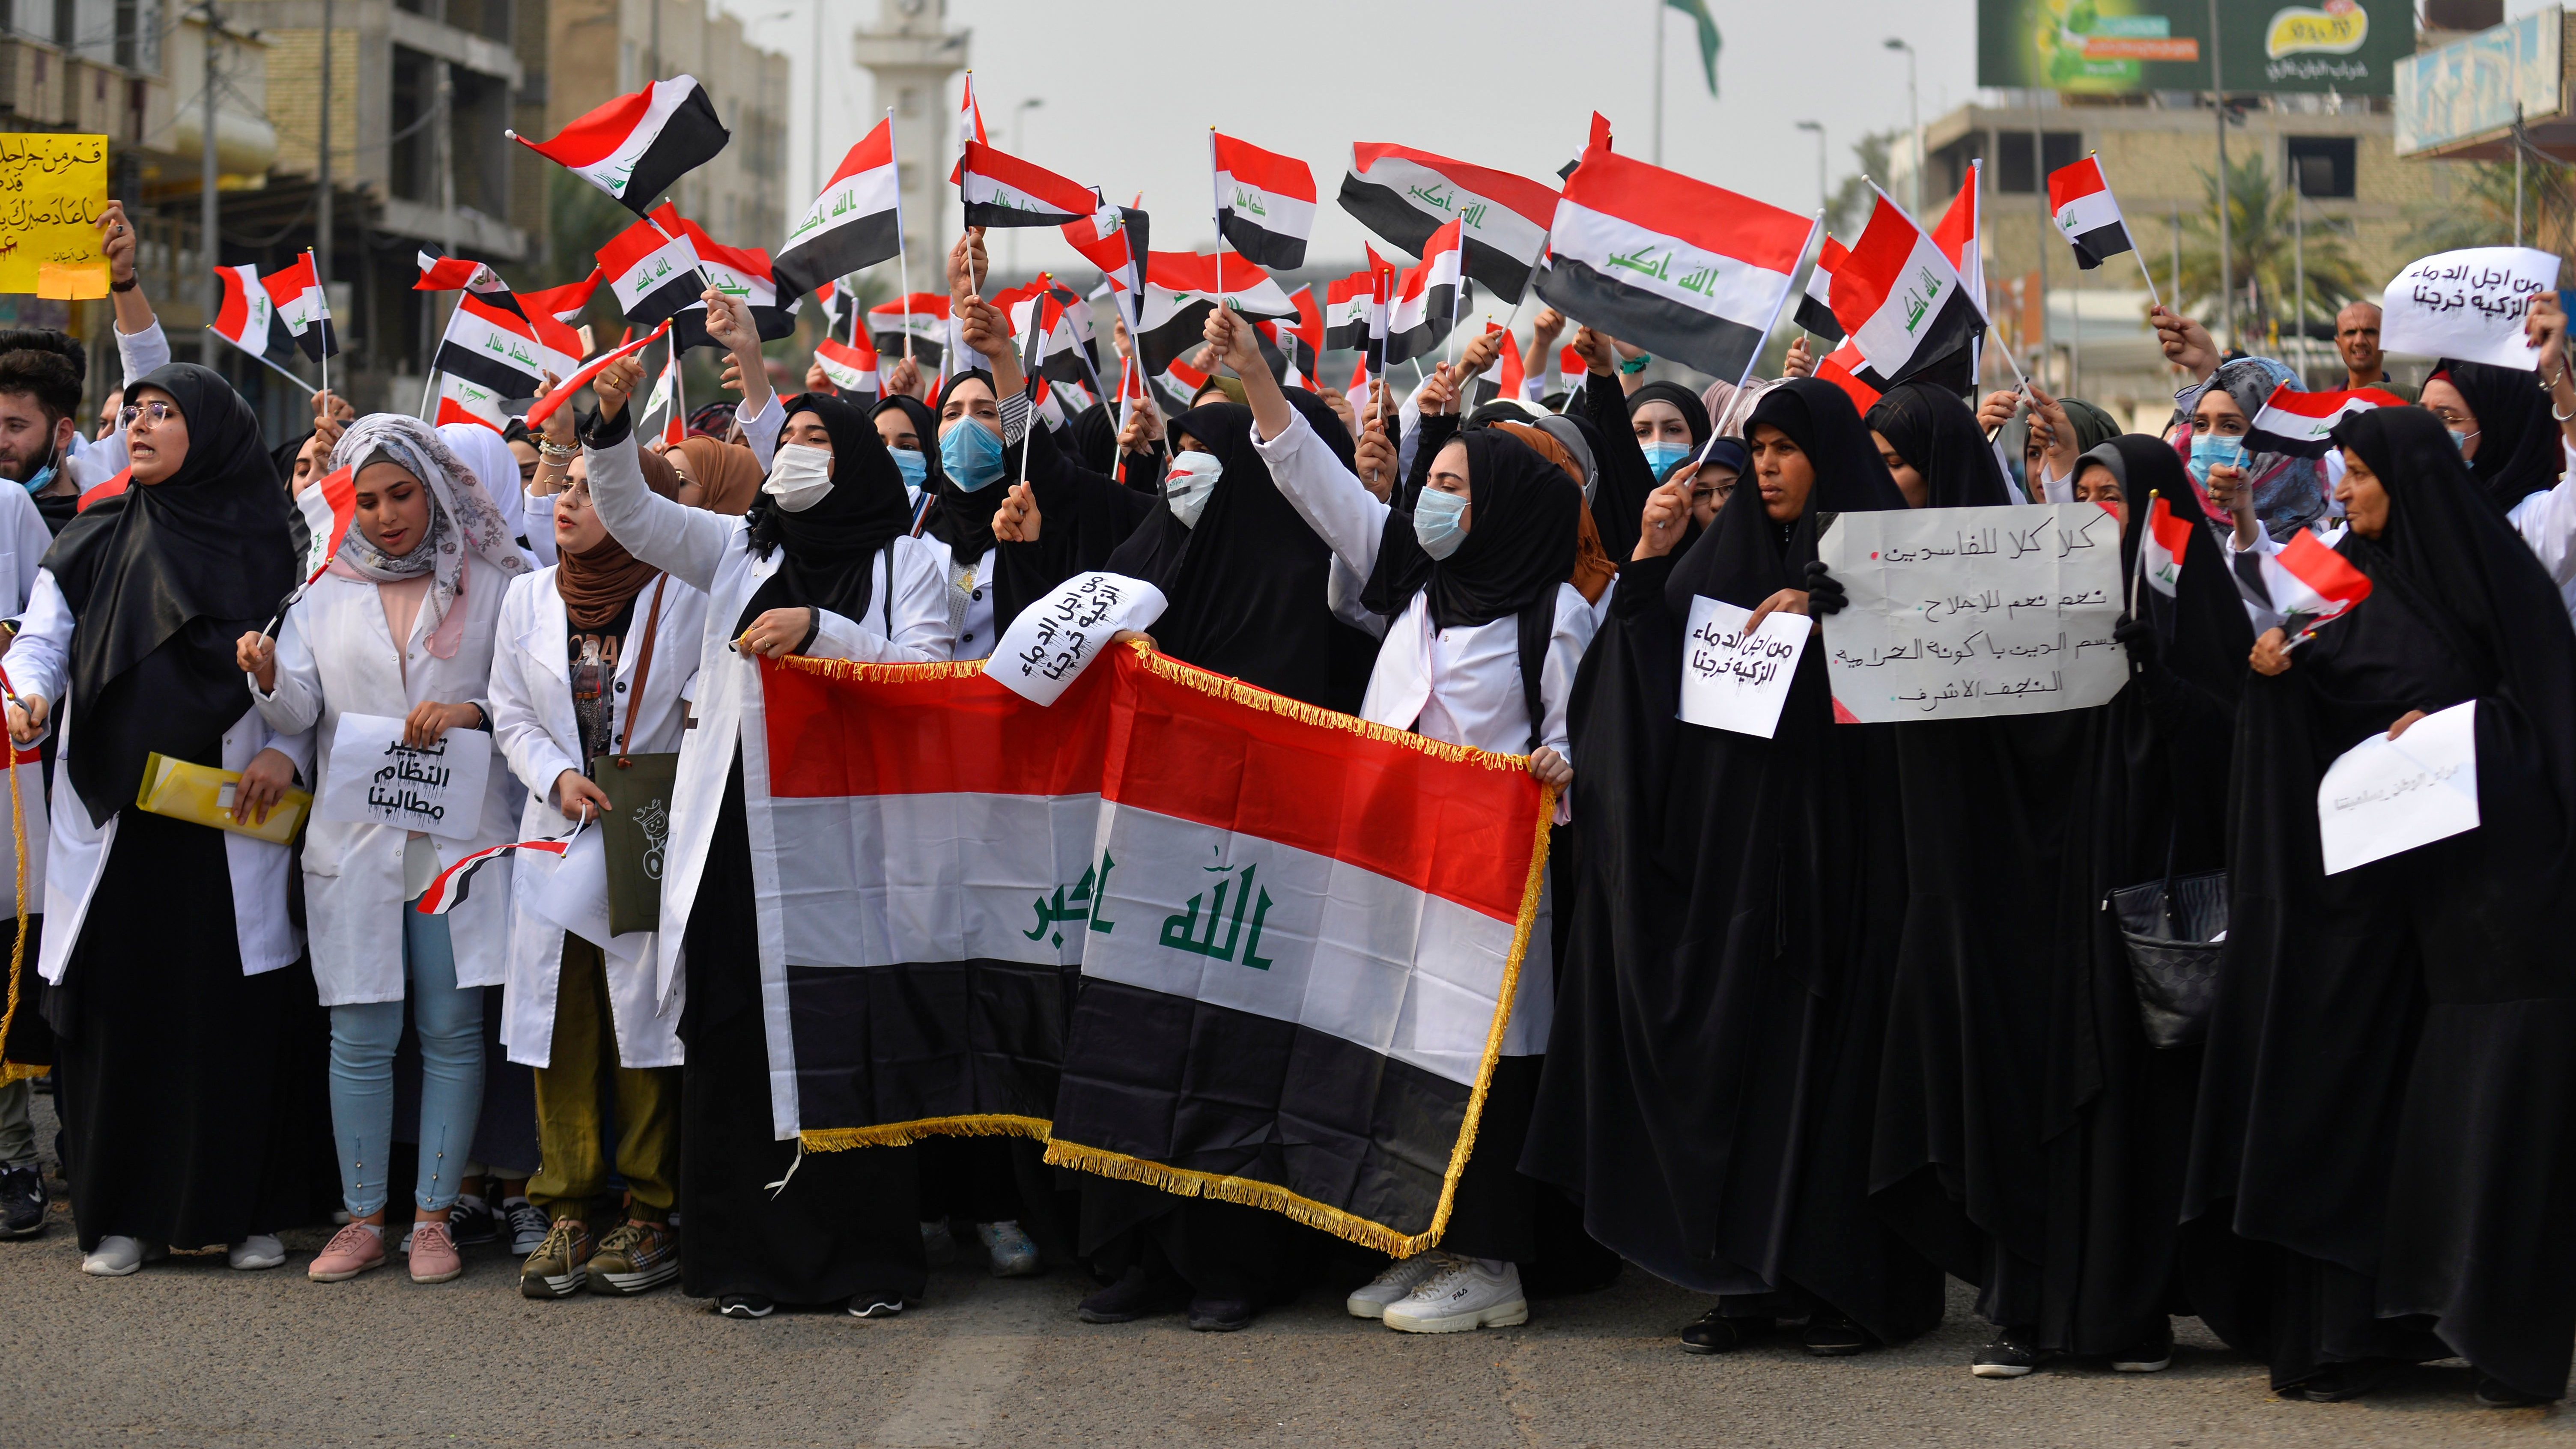 Iraqi Teachers Union Stands With Protesters